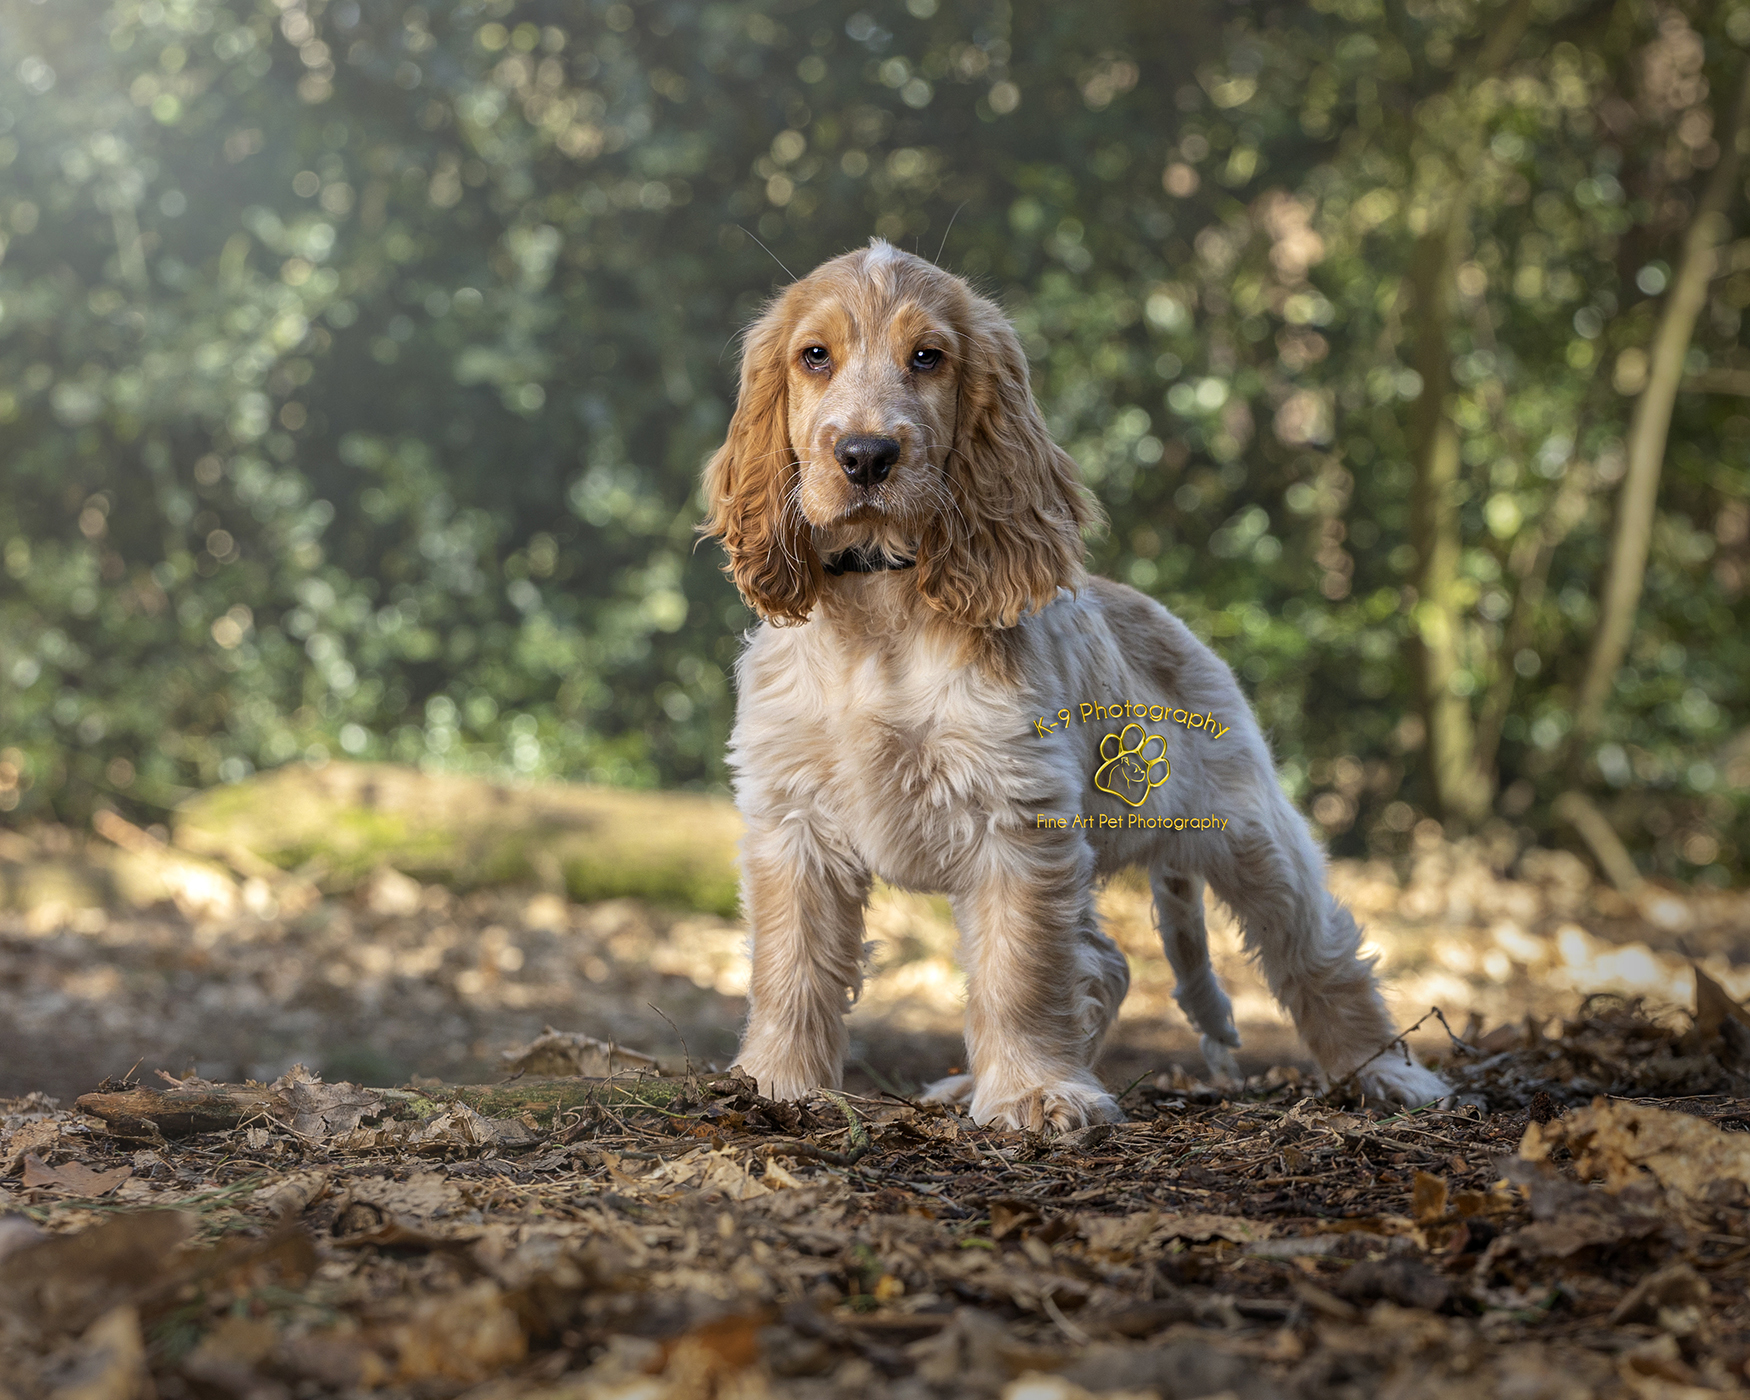 Beautiful puppy photography from Bedfordshire dog photographer Adrian Bullers